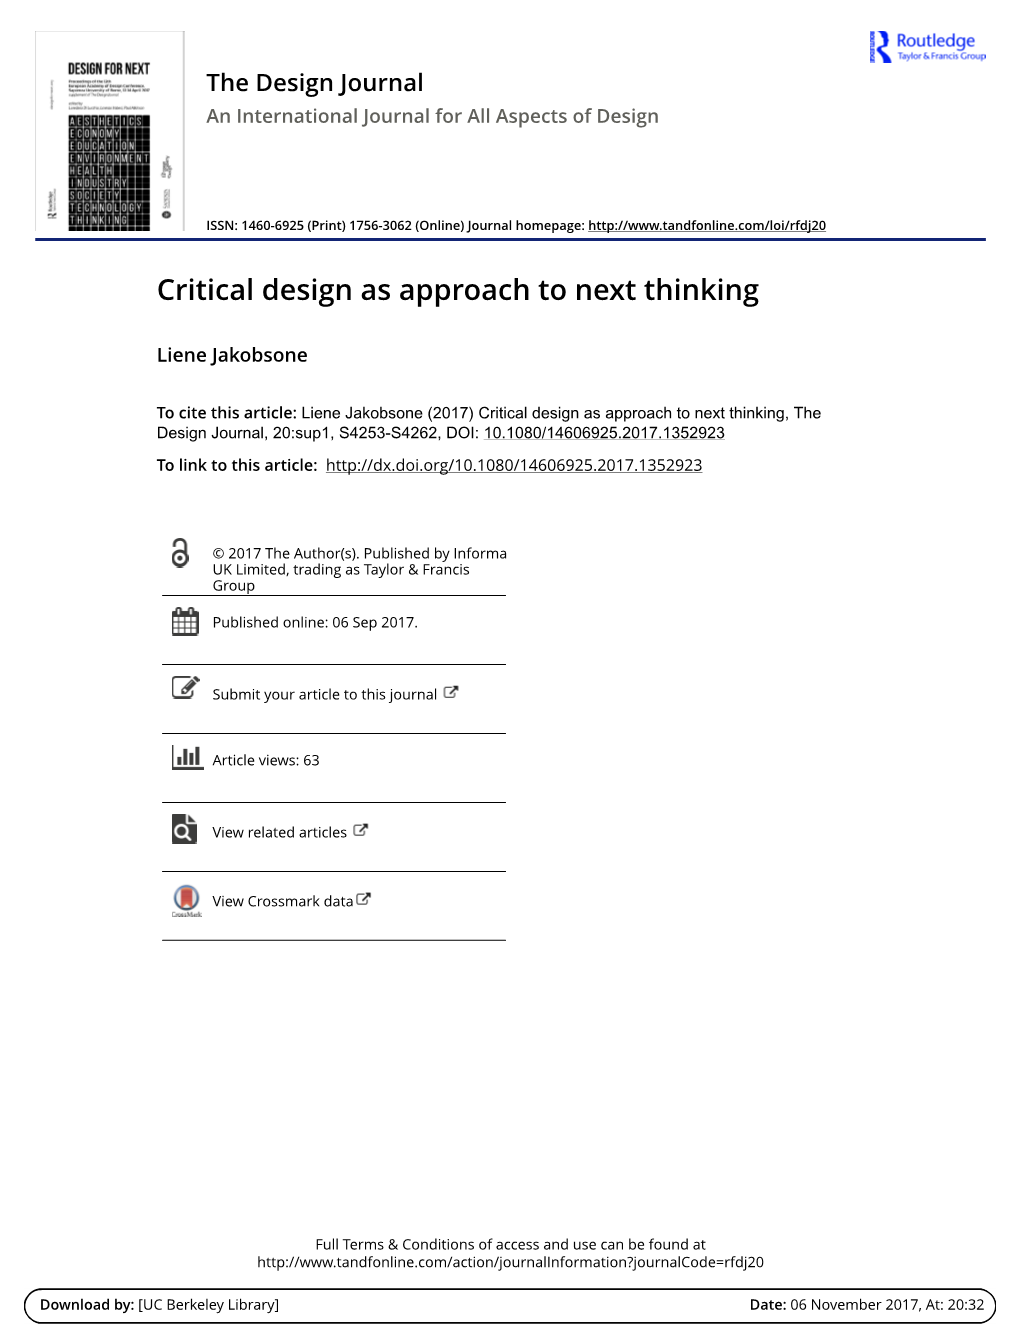 Critical Design As Approach to Next Thinking